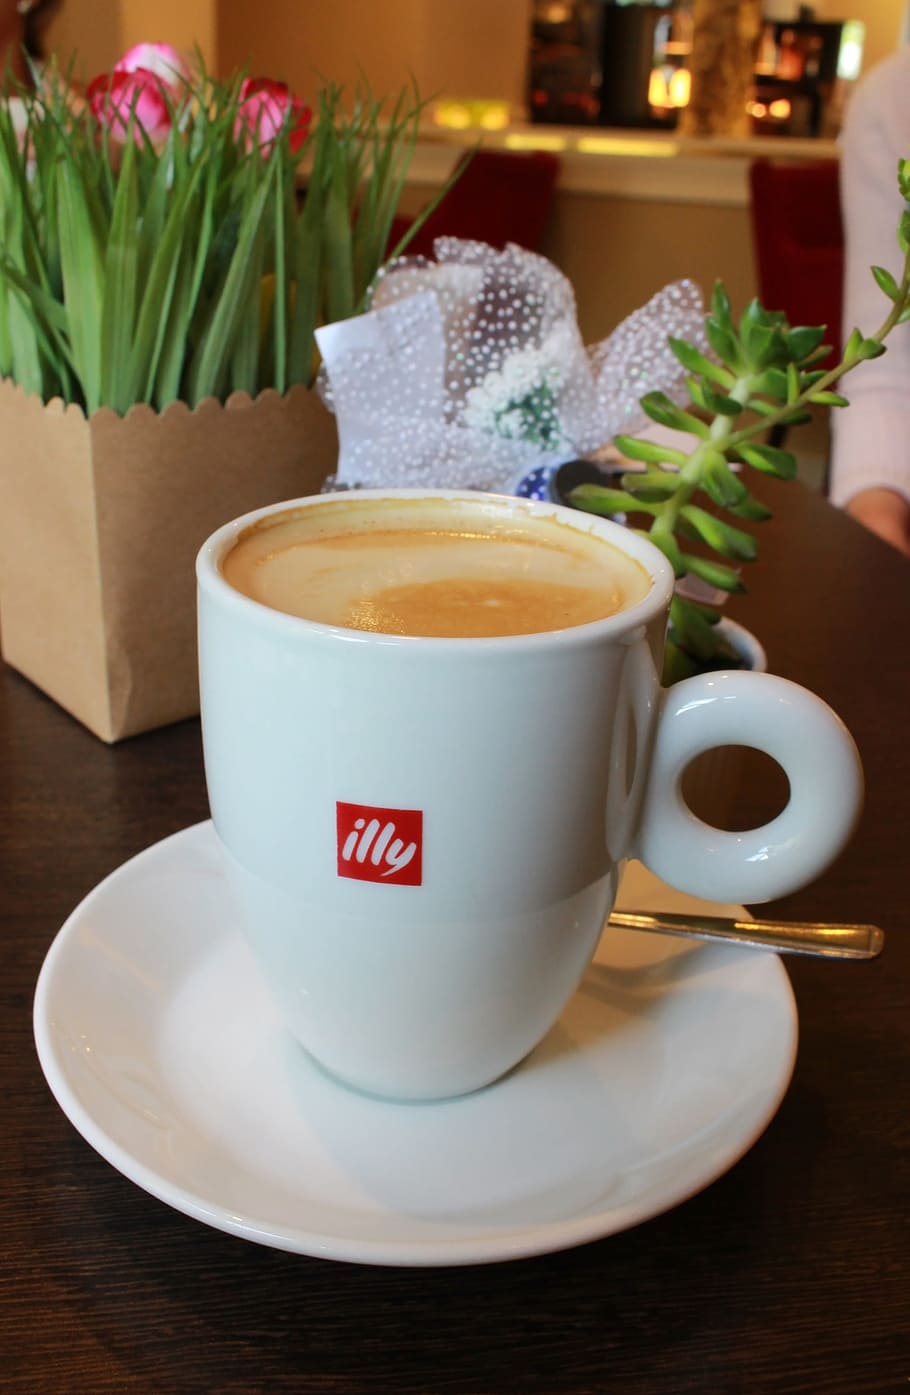 Cup of Illy branded coffee - Illycaffe is an Italian coffee roasting company specializing in espresso - Editorial Use Only, HD wallpaper